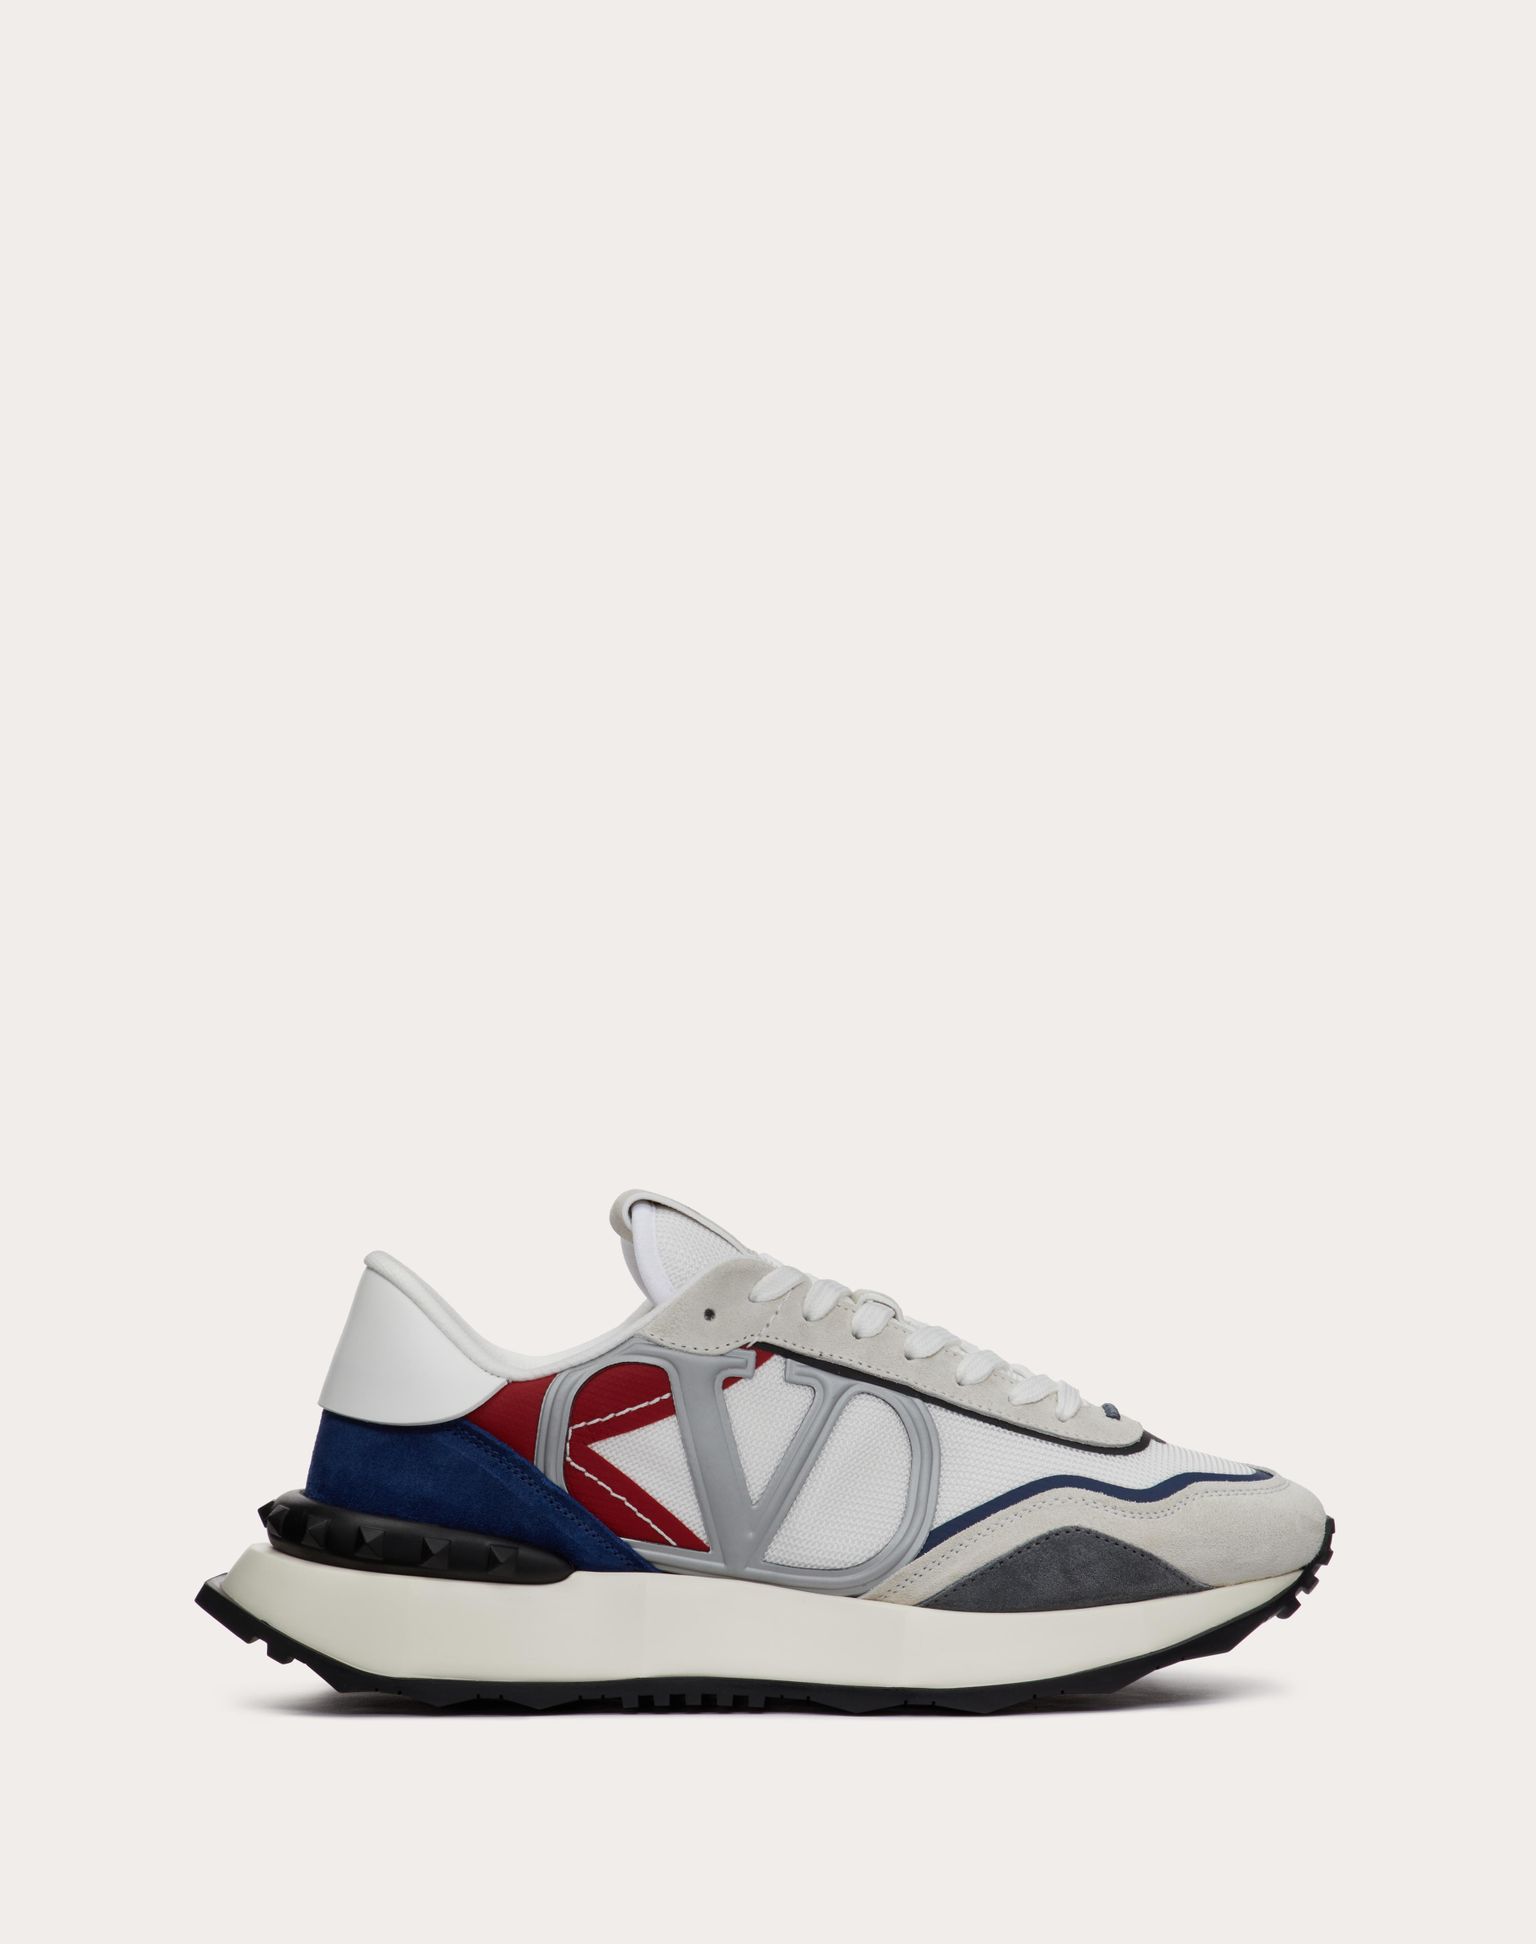 NETRUNNER-FABRIC-AND-SUEDE-SNEAKER